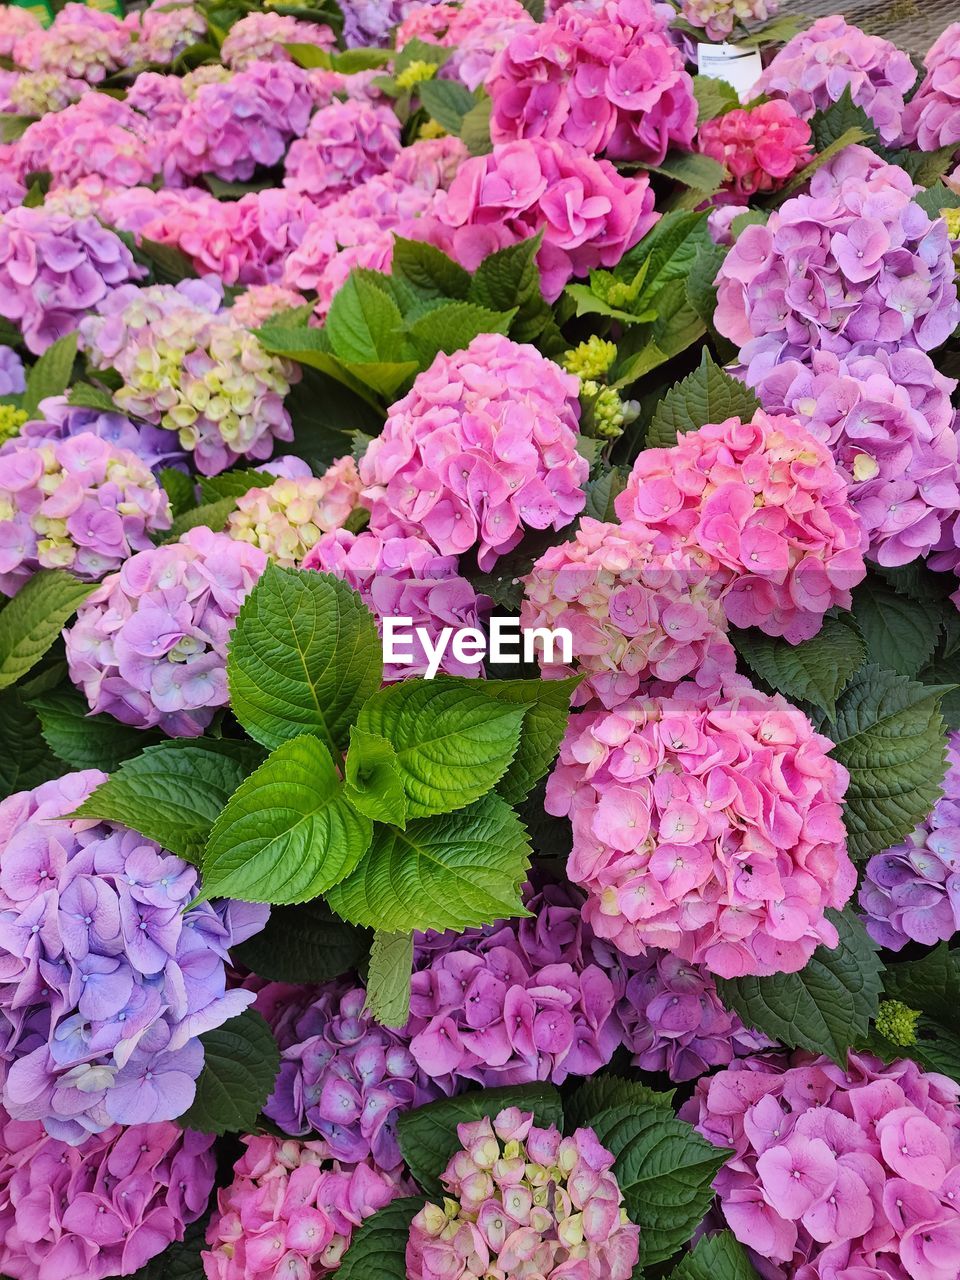 plant, flower, freshness, flowering plant, beauty in nature, pink, leaf, full frame, plant part, nature, growth, no people, high angle view, fragility, close-up, backgrounds, day, petal, flower head, inflorescence, directly above, hydrangea, outdoors, green, abundance, botany